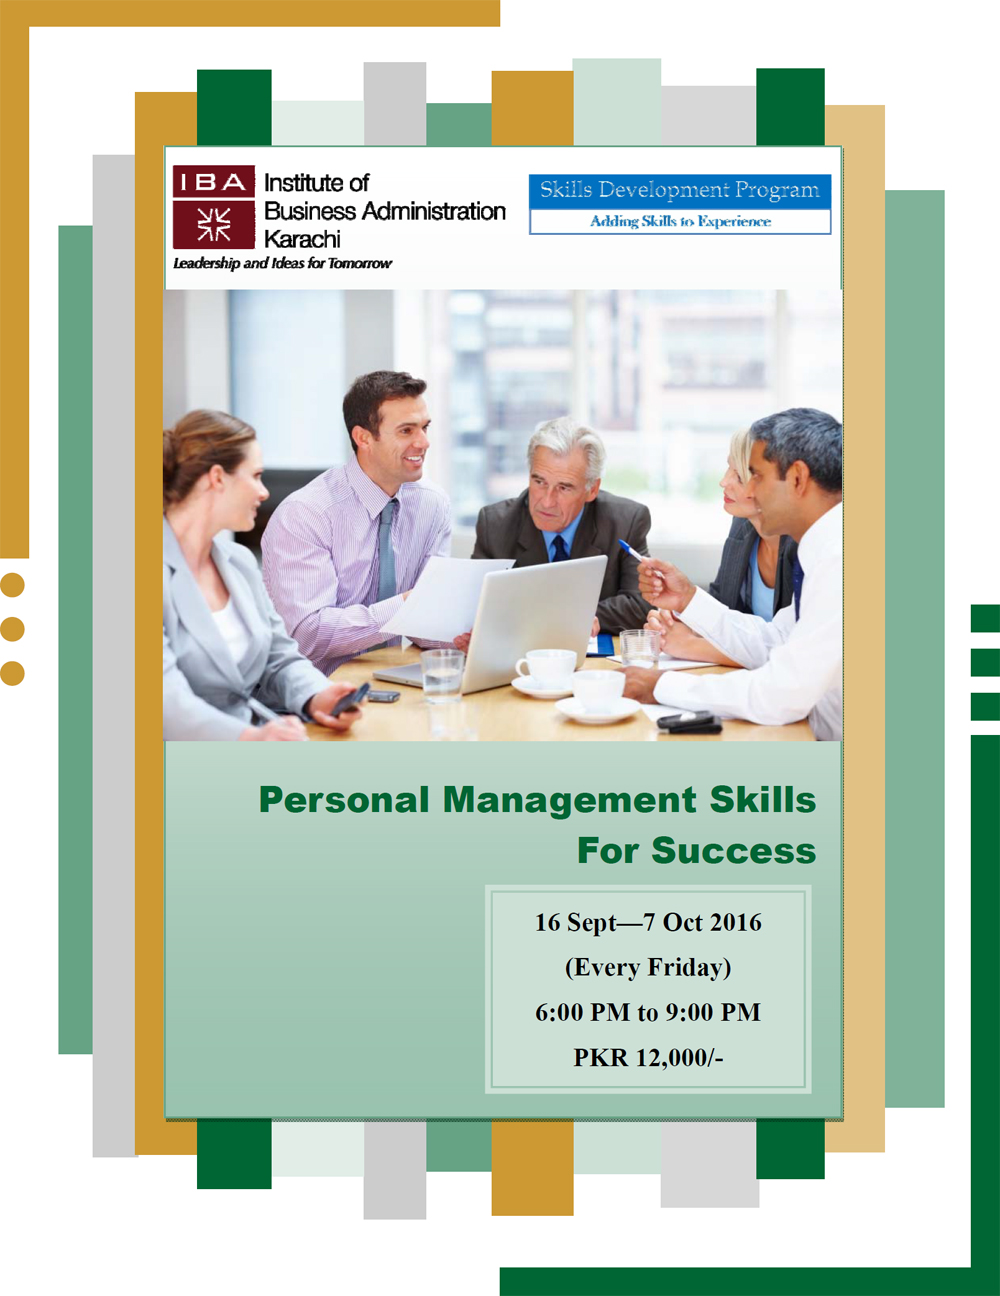 Personal Management Skills for Success